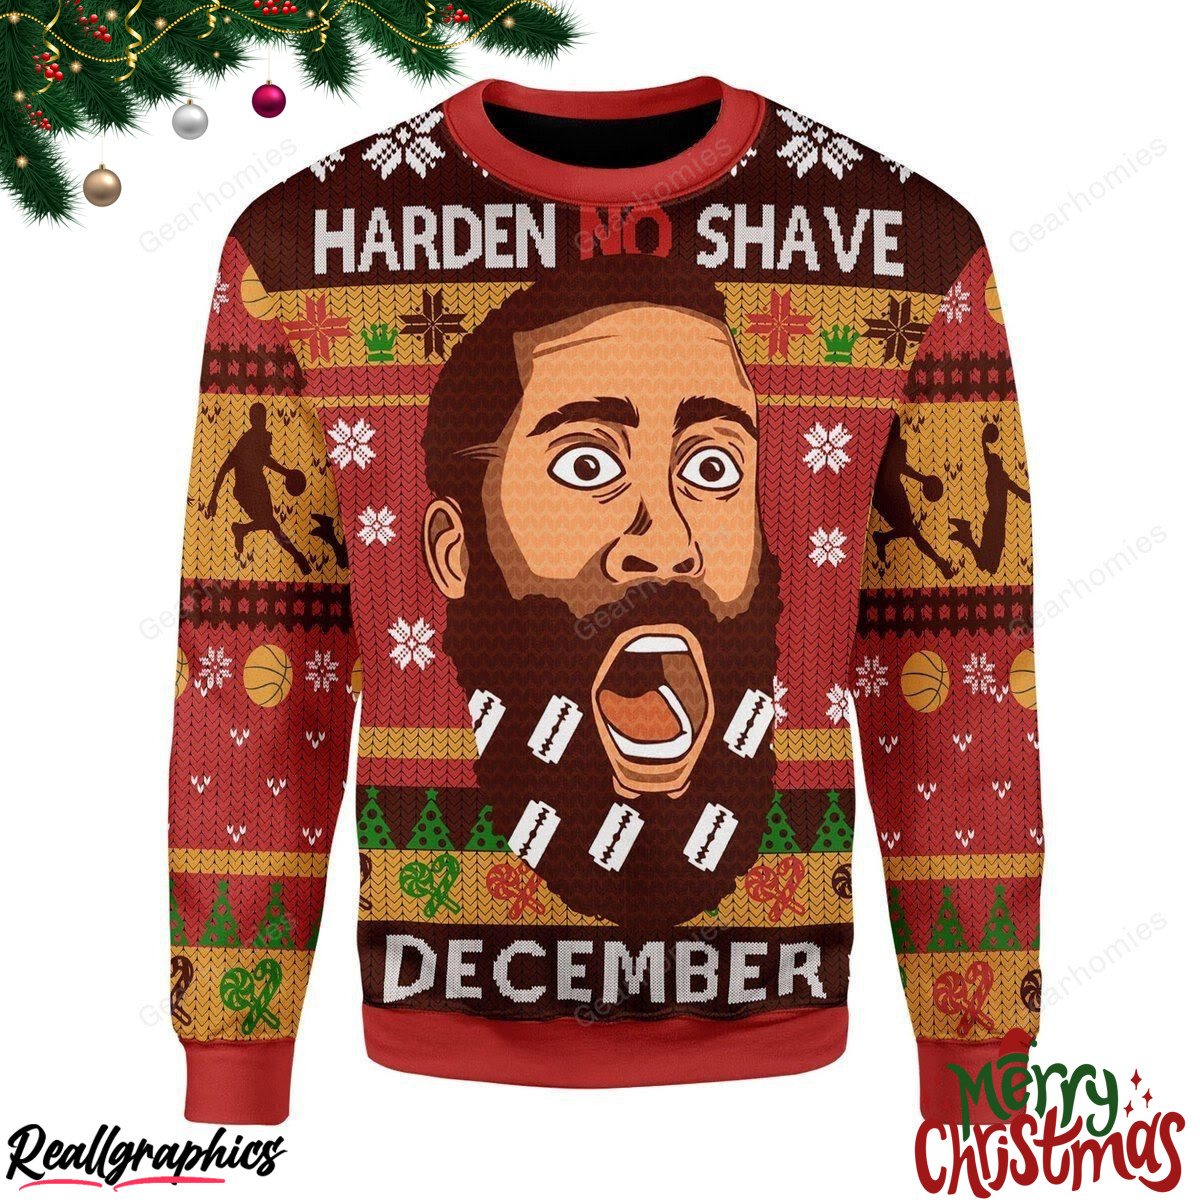 merry christmas harden no shave december all over print ugly sweatshirt, sweater